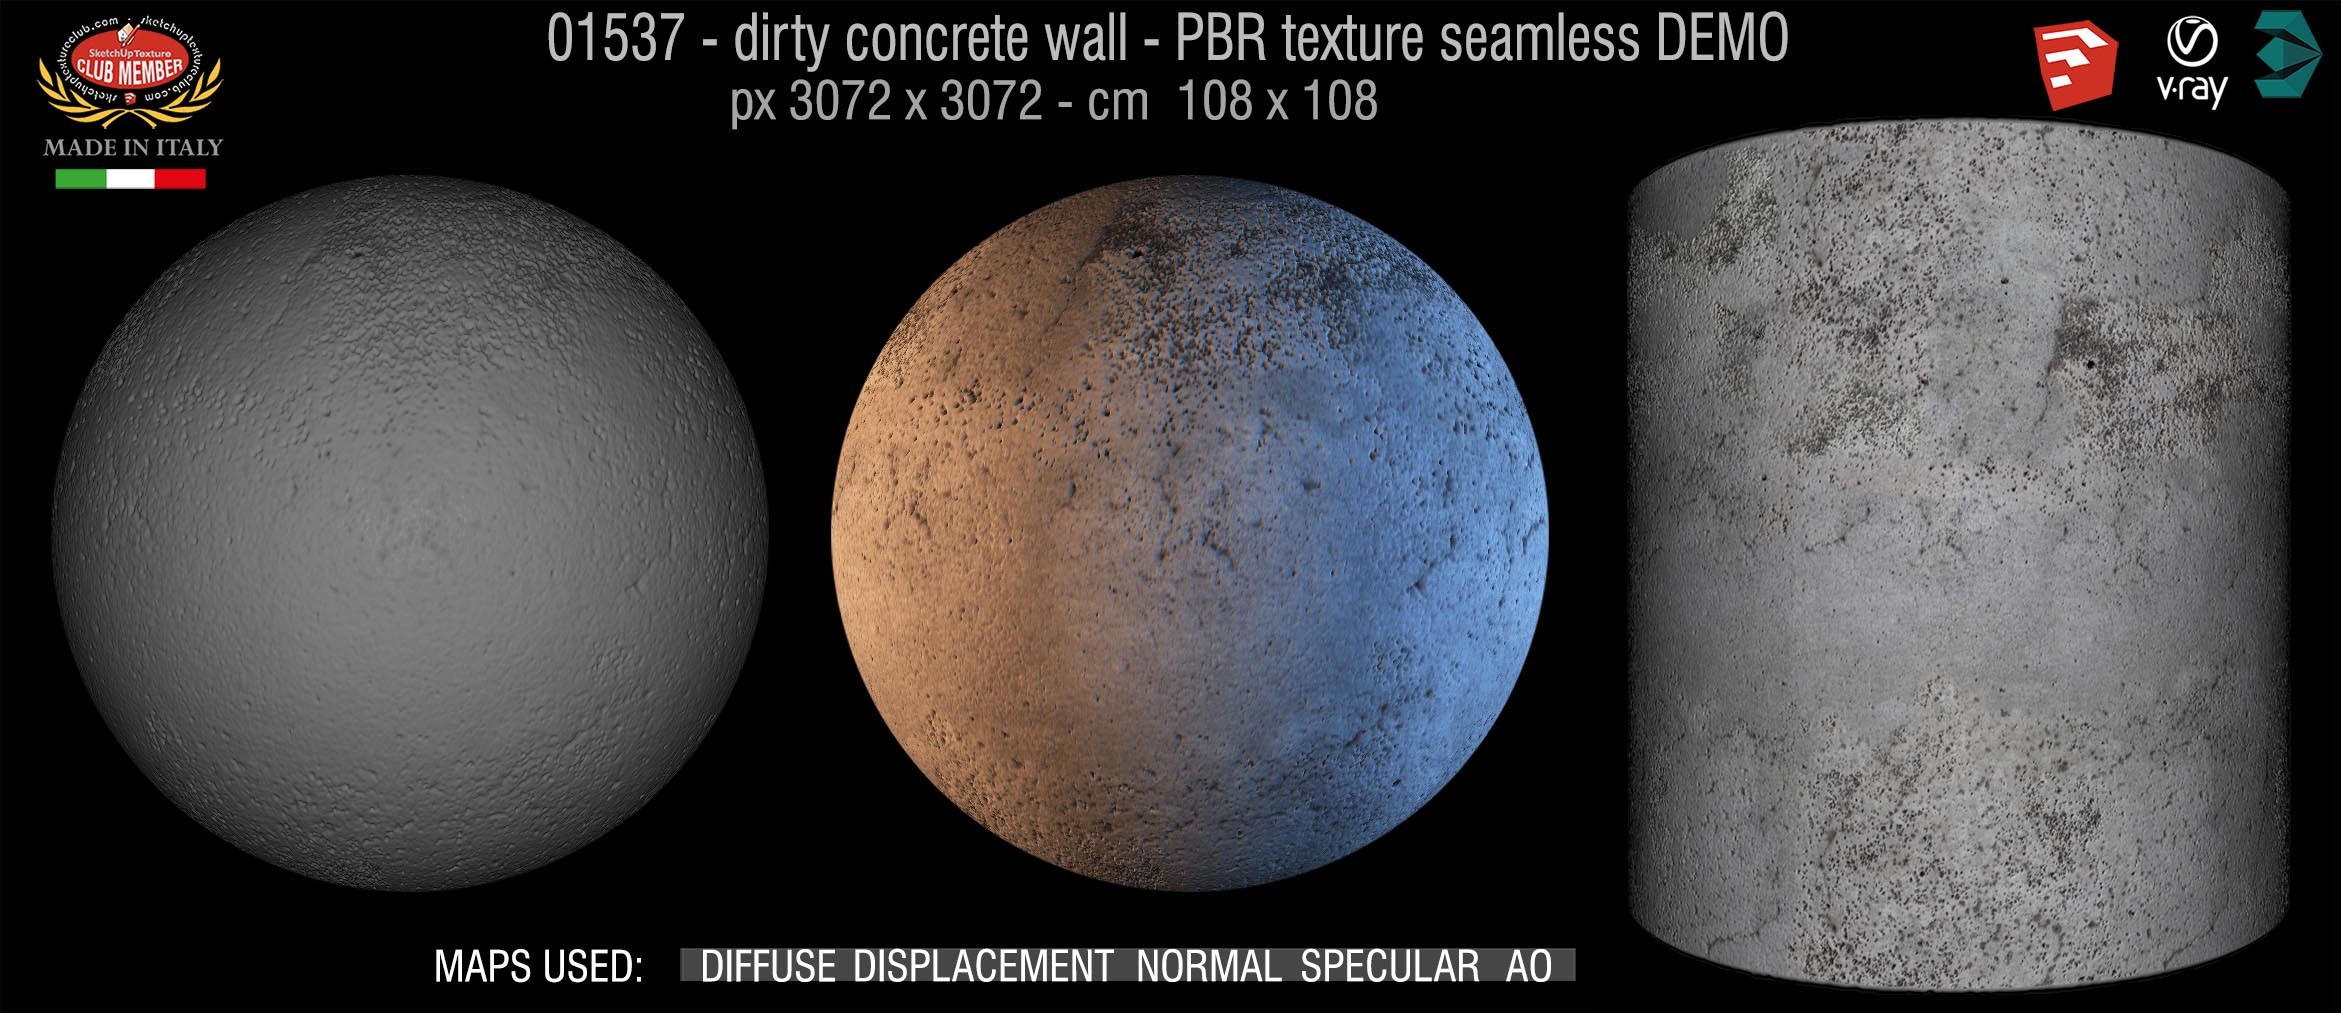 01537 Concrete bare dirty wall PBR texture seamless DEMO